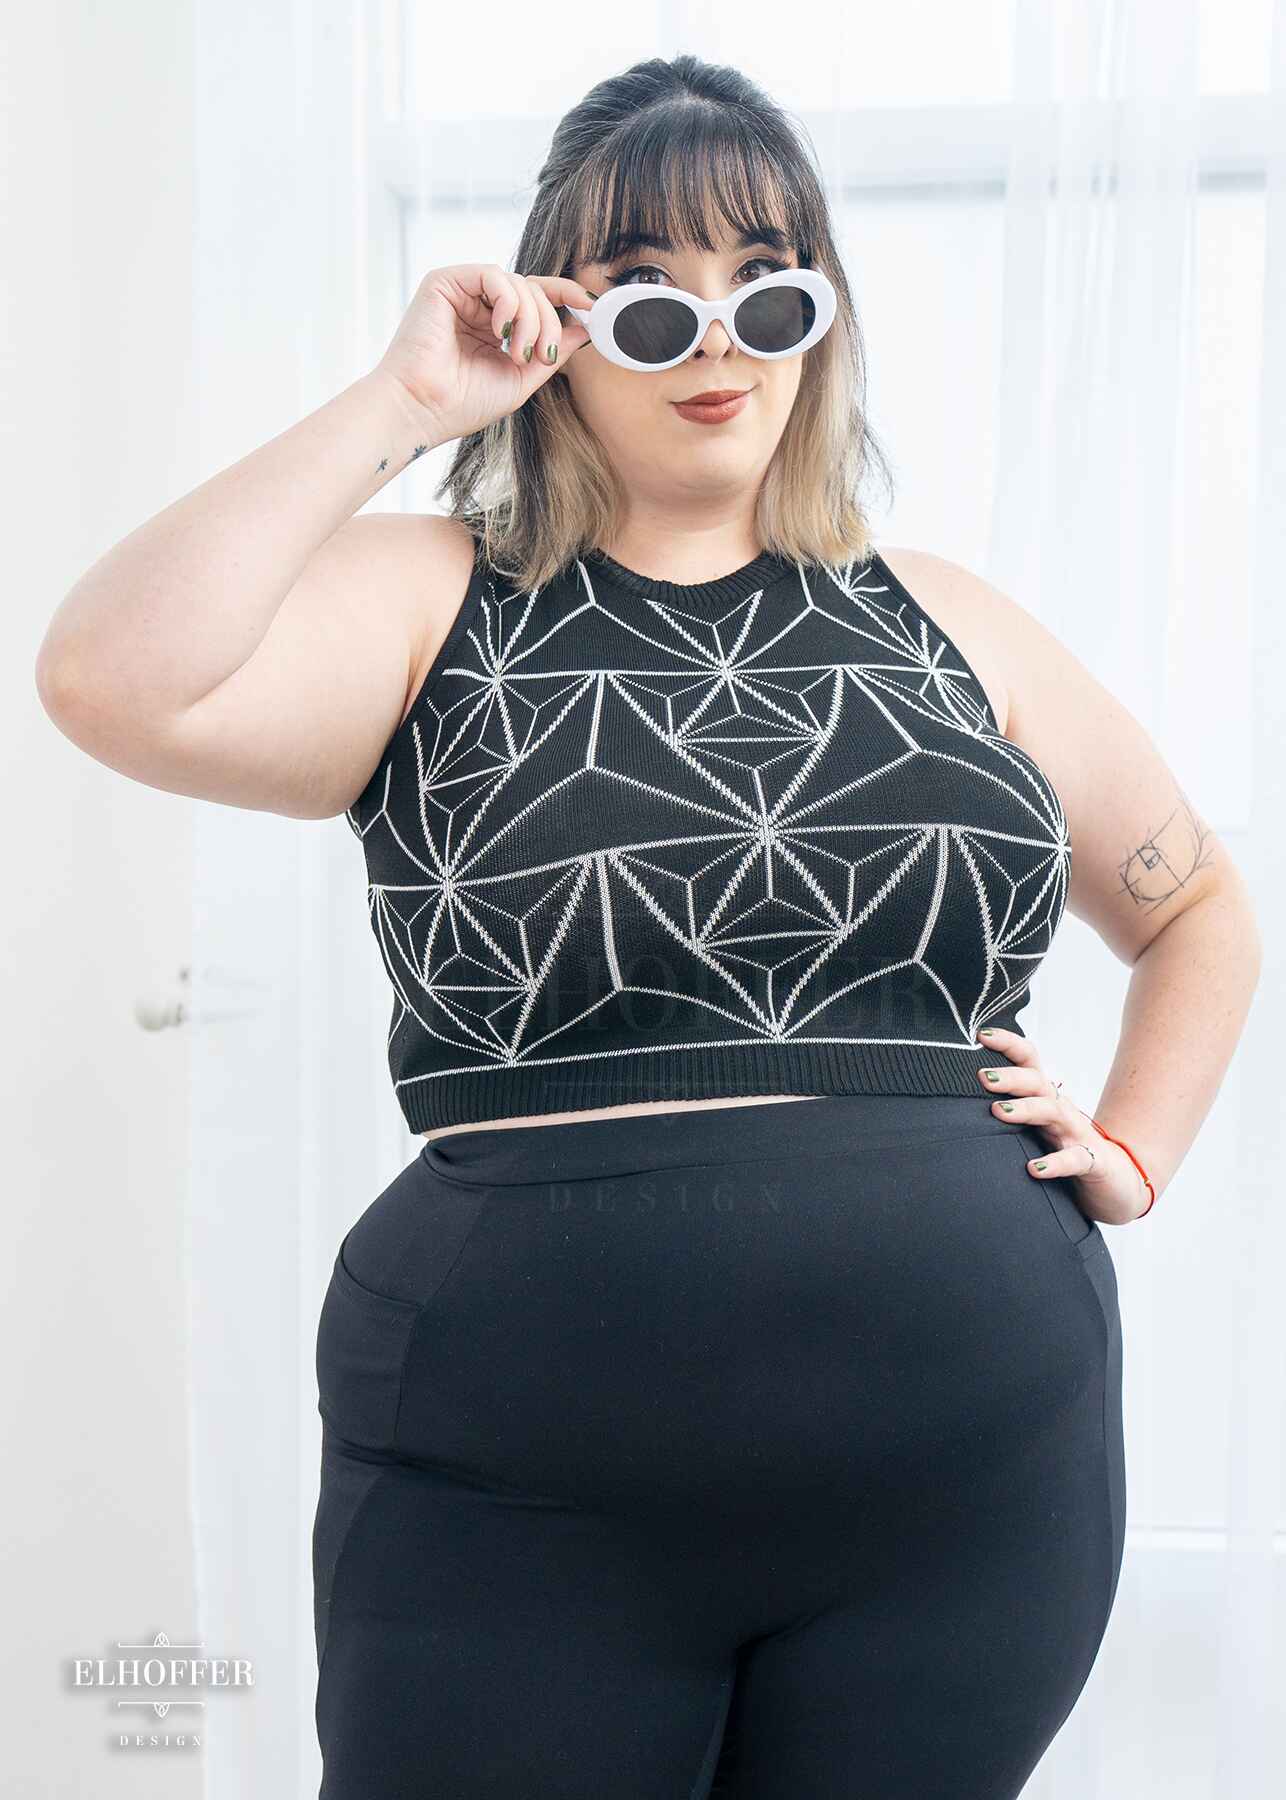 Katie Lynn, a fair skinned 2xl model with short black and white hair with bangs, is wearing a pullover cropped sleeveless sweater.  The main body of the sweater is black and has a white geometric 3d triangle design. She paired the crop top with black leggings.